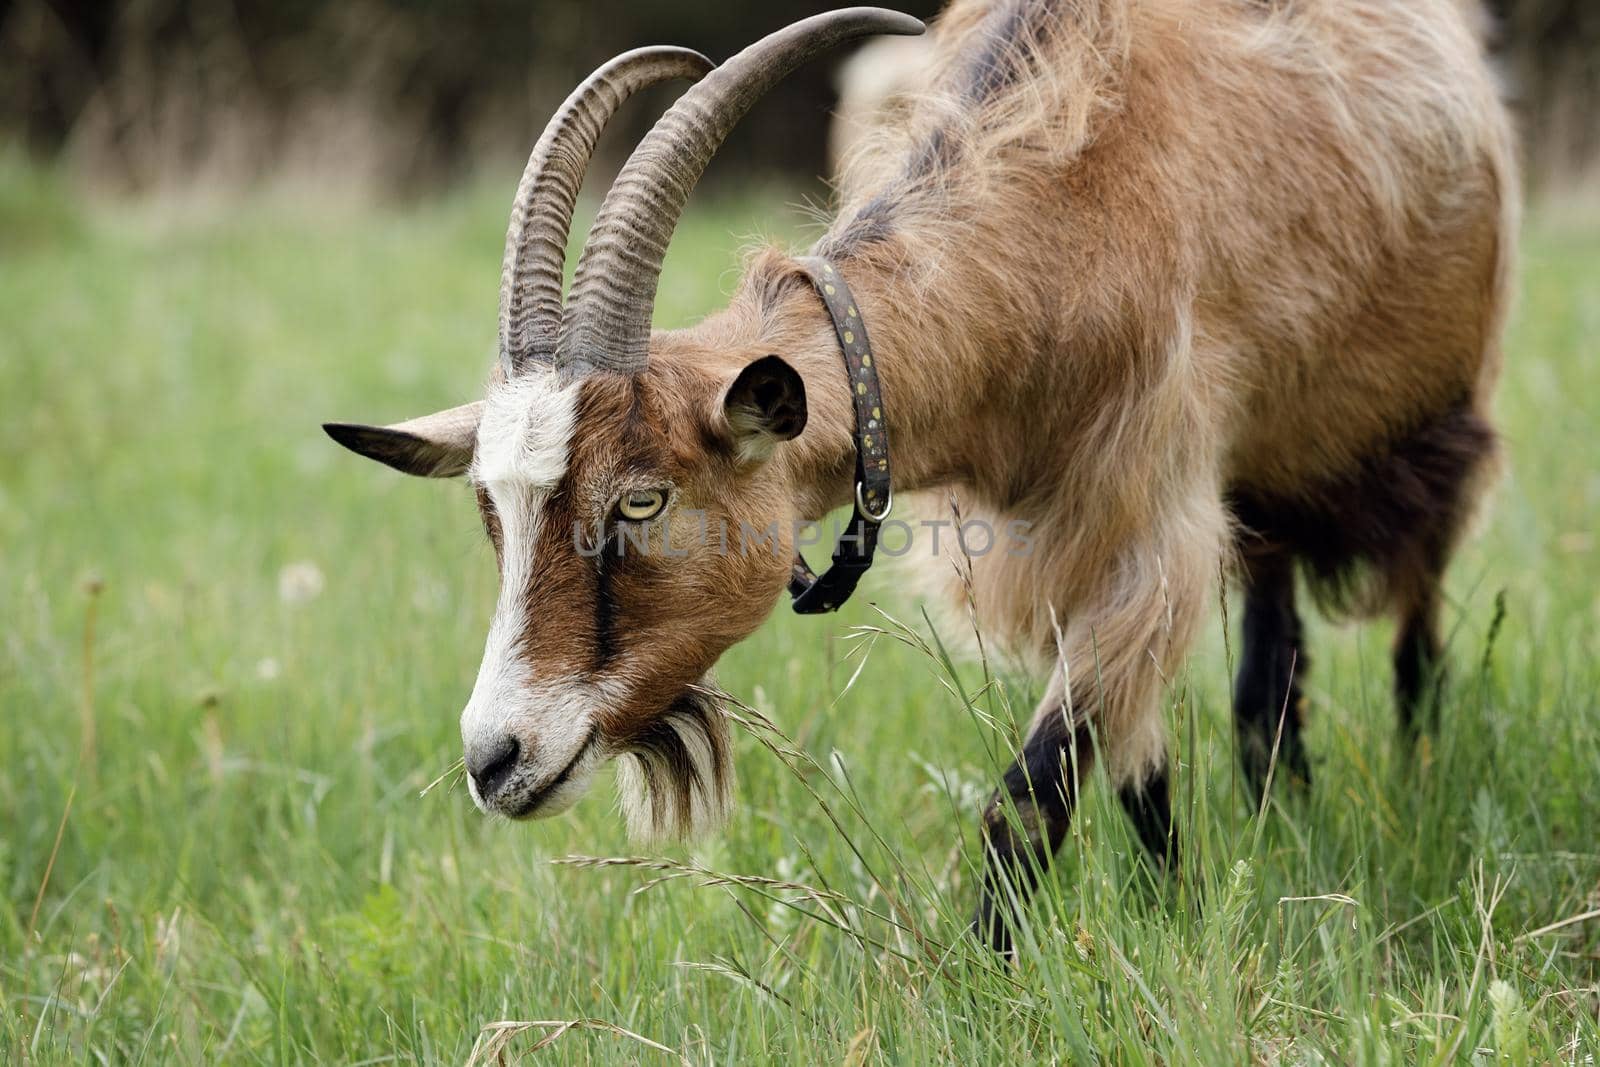 Close-up portrait of brown goat with long curved horns in a meadow.